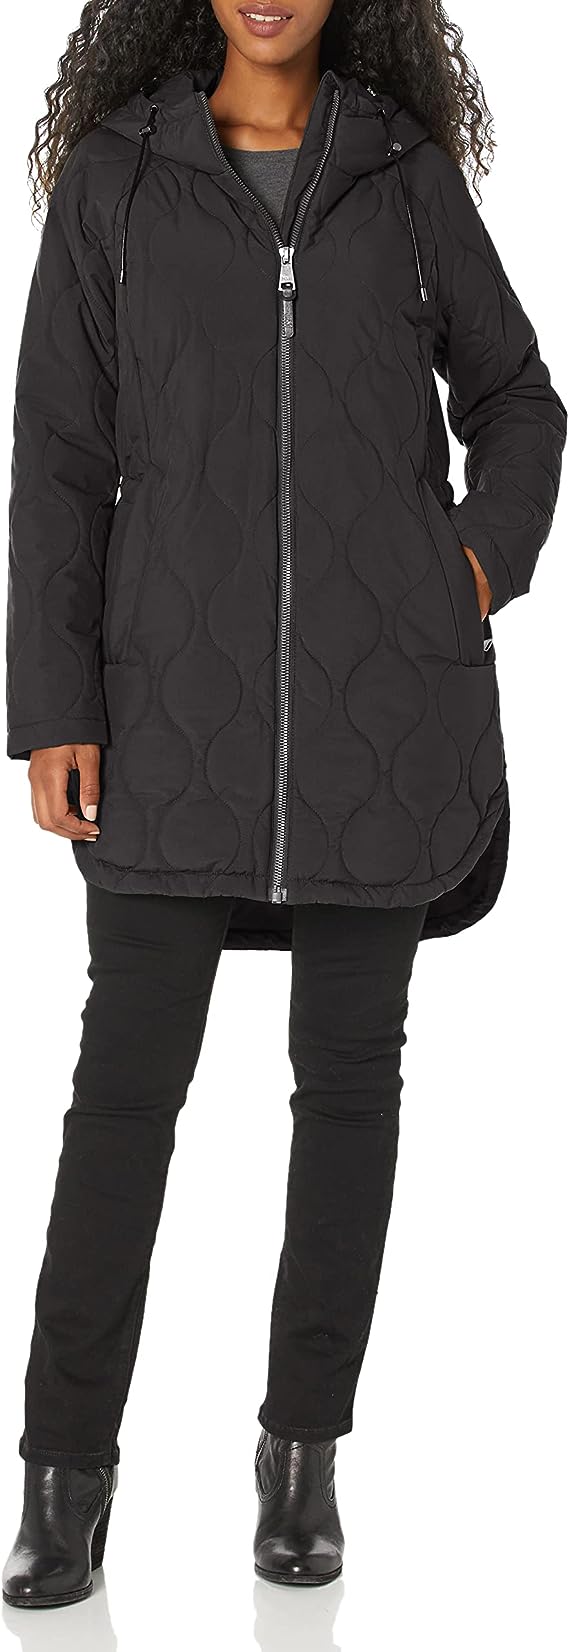 DKNY Women's Quilted Parka Black